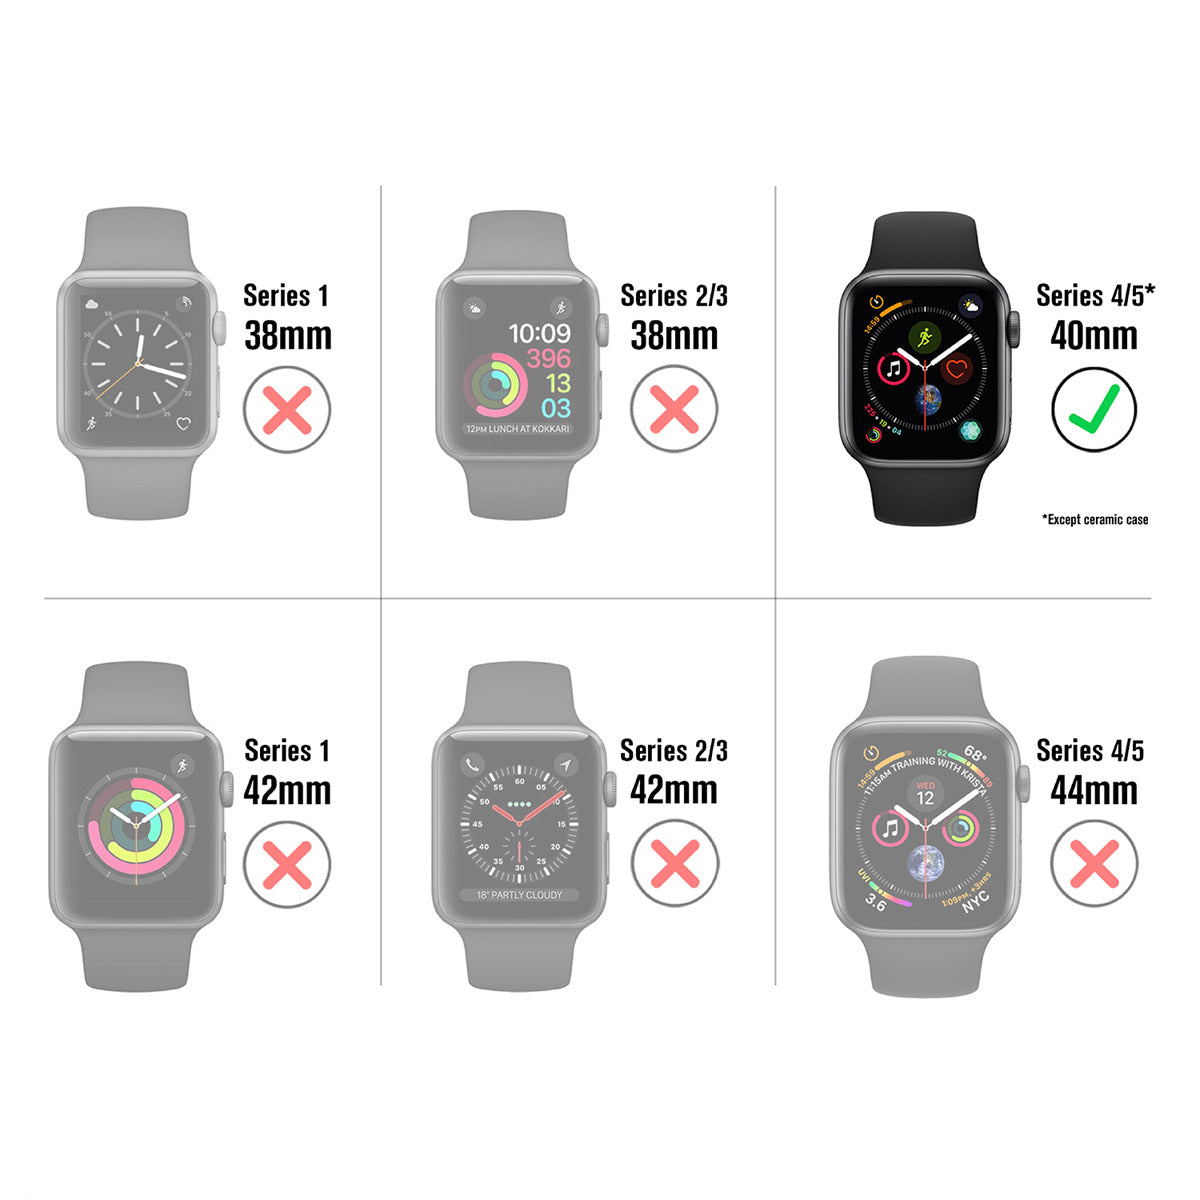 catalyst apple watch series 6 5 4 se gen 2 1 40mm 44mm waterproof case band showing different sizes of apple watch text reads series 1 38mm series 2/3 38mm series 4/5 40mm series 1 42mm series 2/3 42mm series 4/5* 44mm except ceramic case